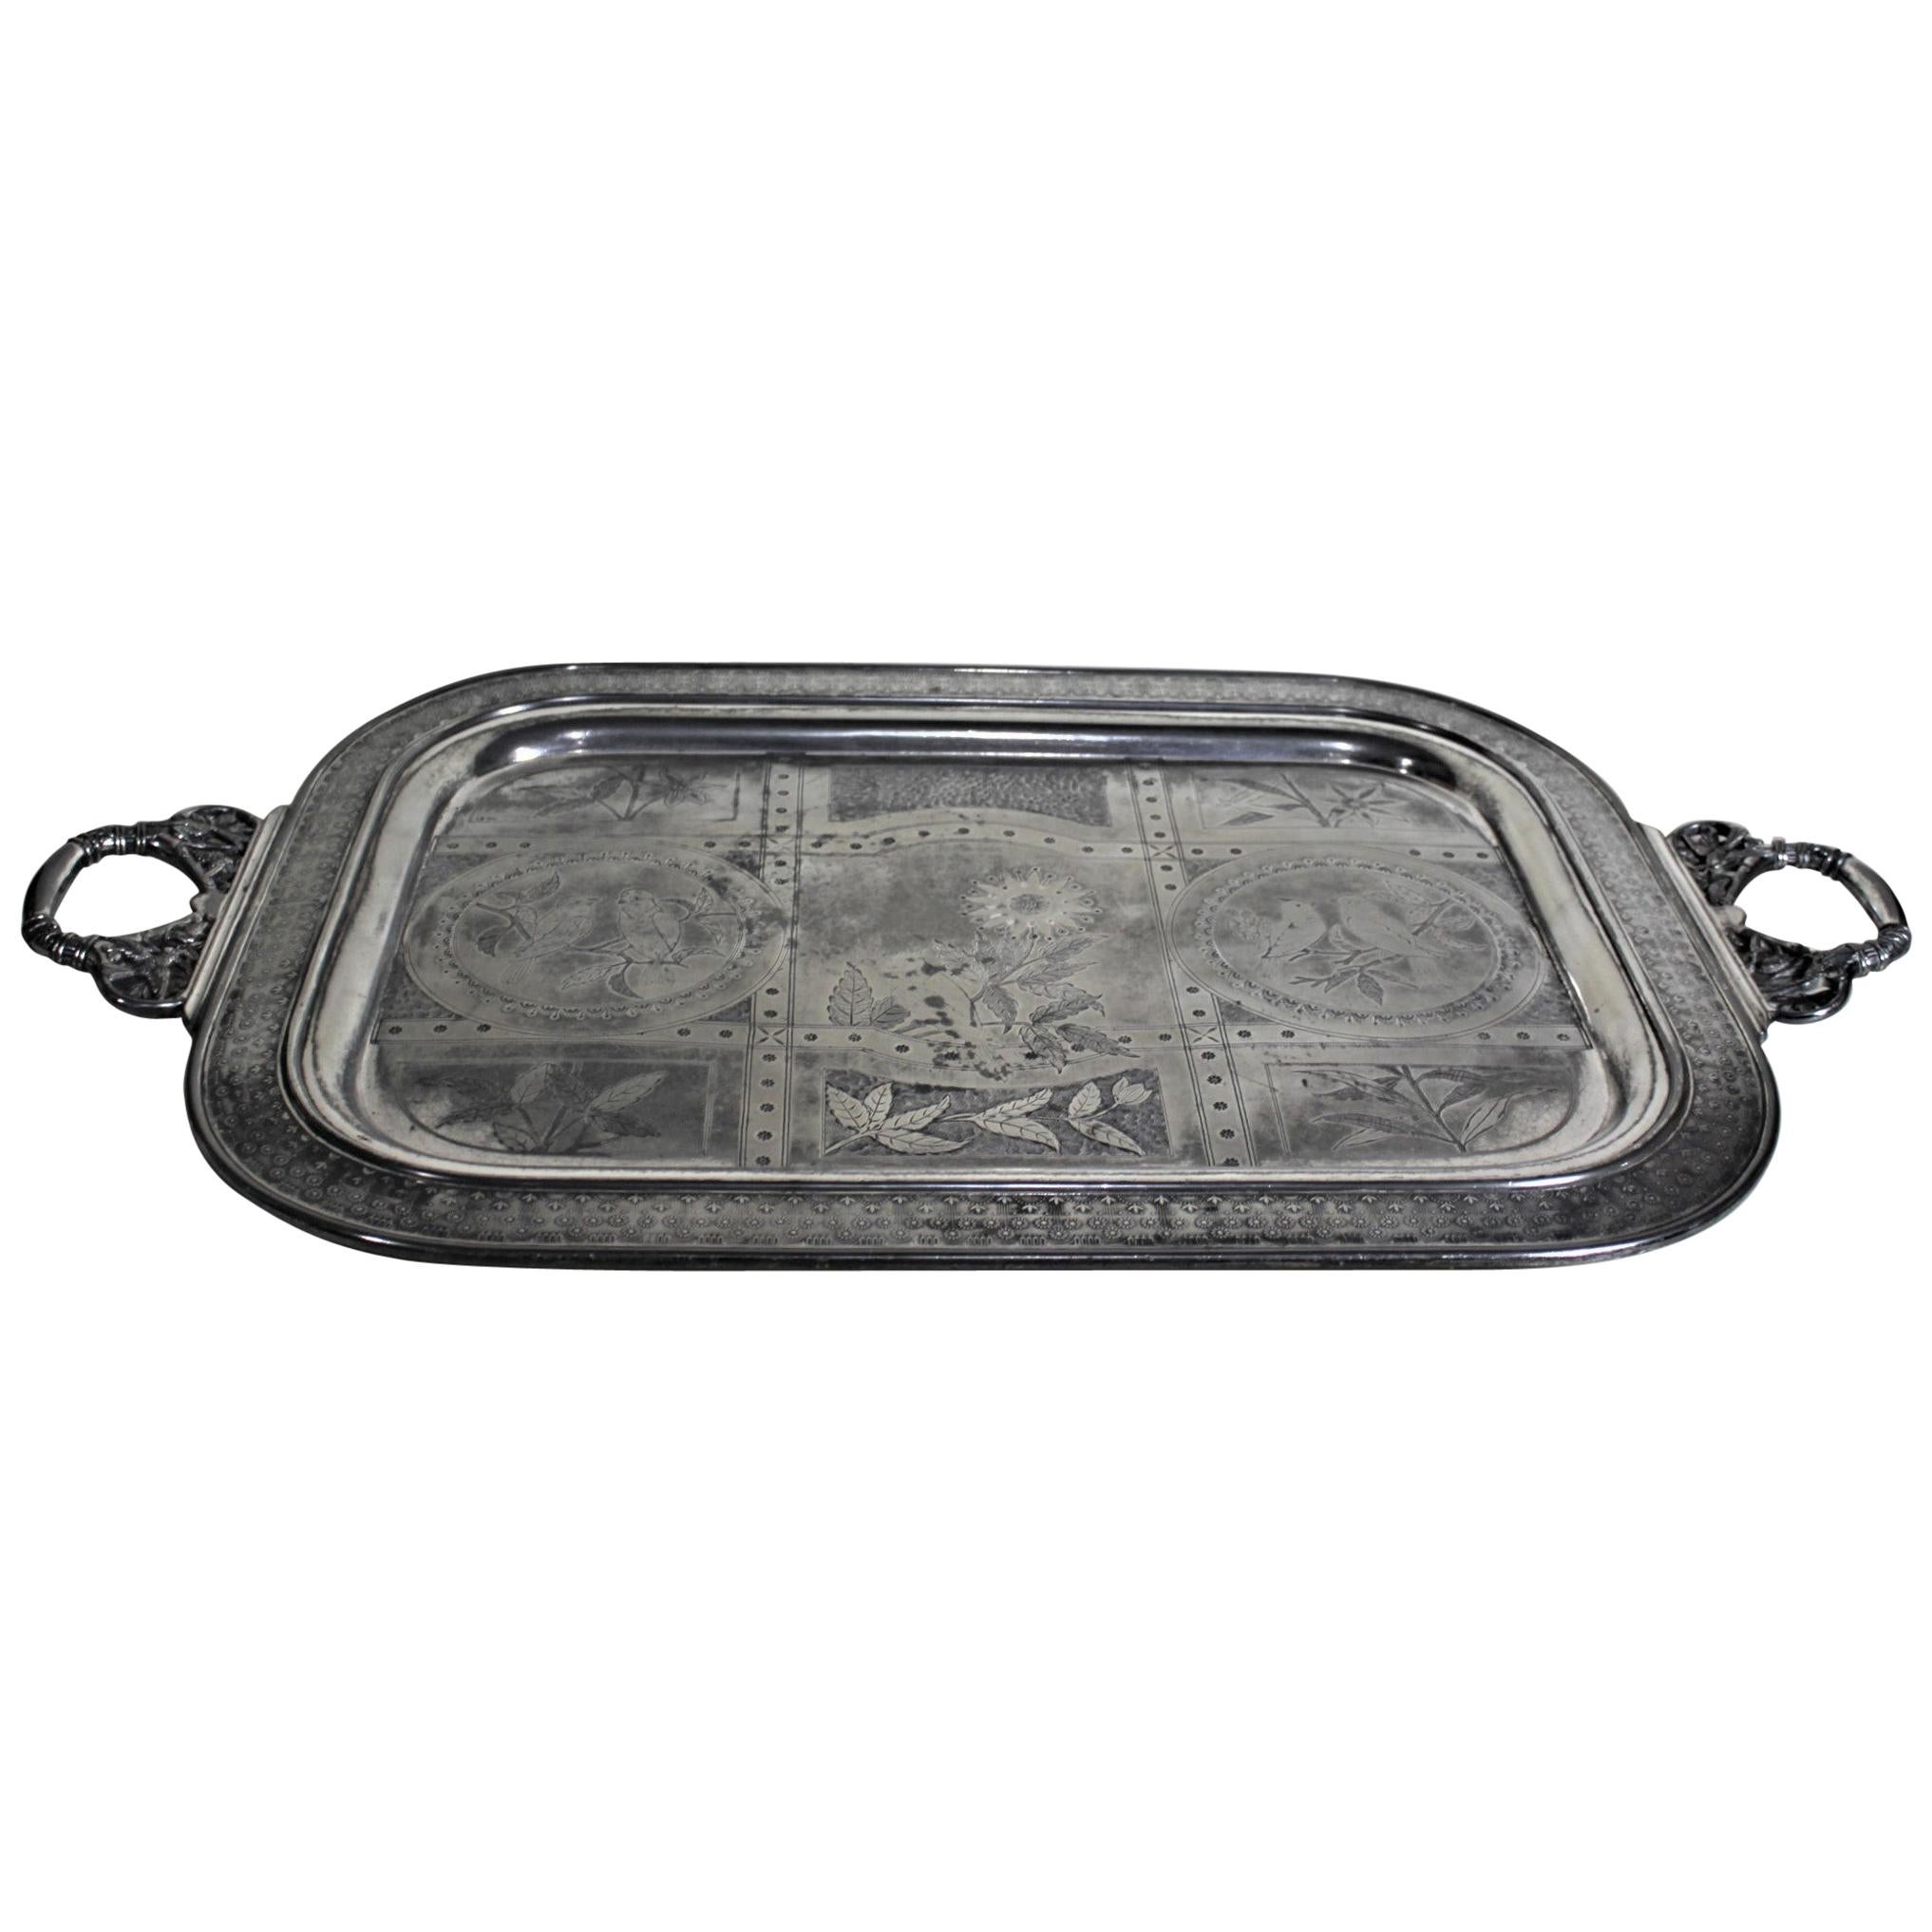 Lg. Aesthetic Movement Silver Plated Serving Tray with Engraved Flowers & Birds